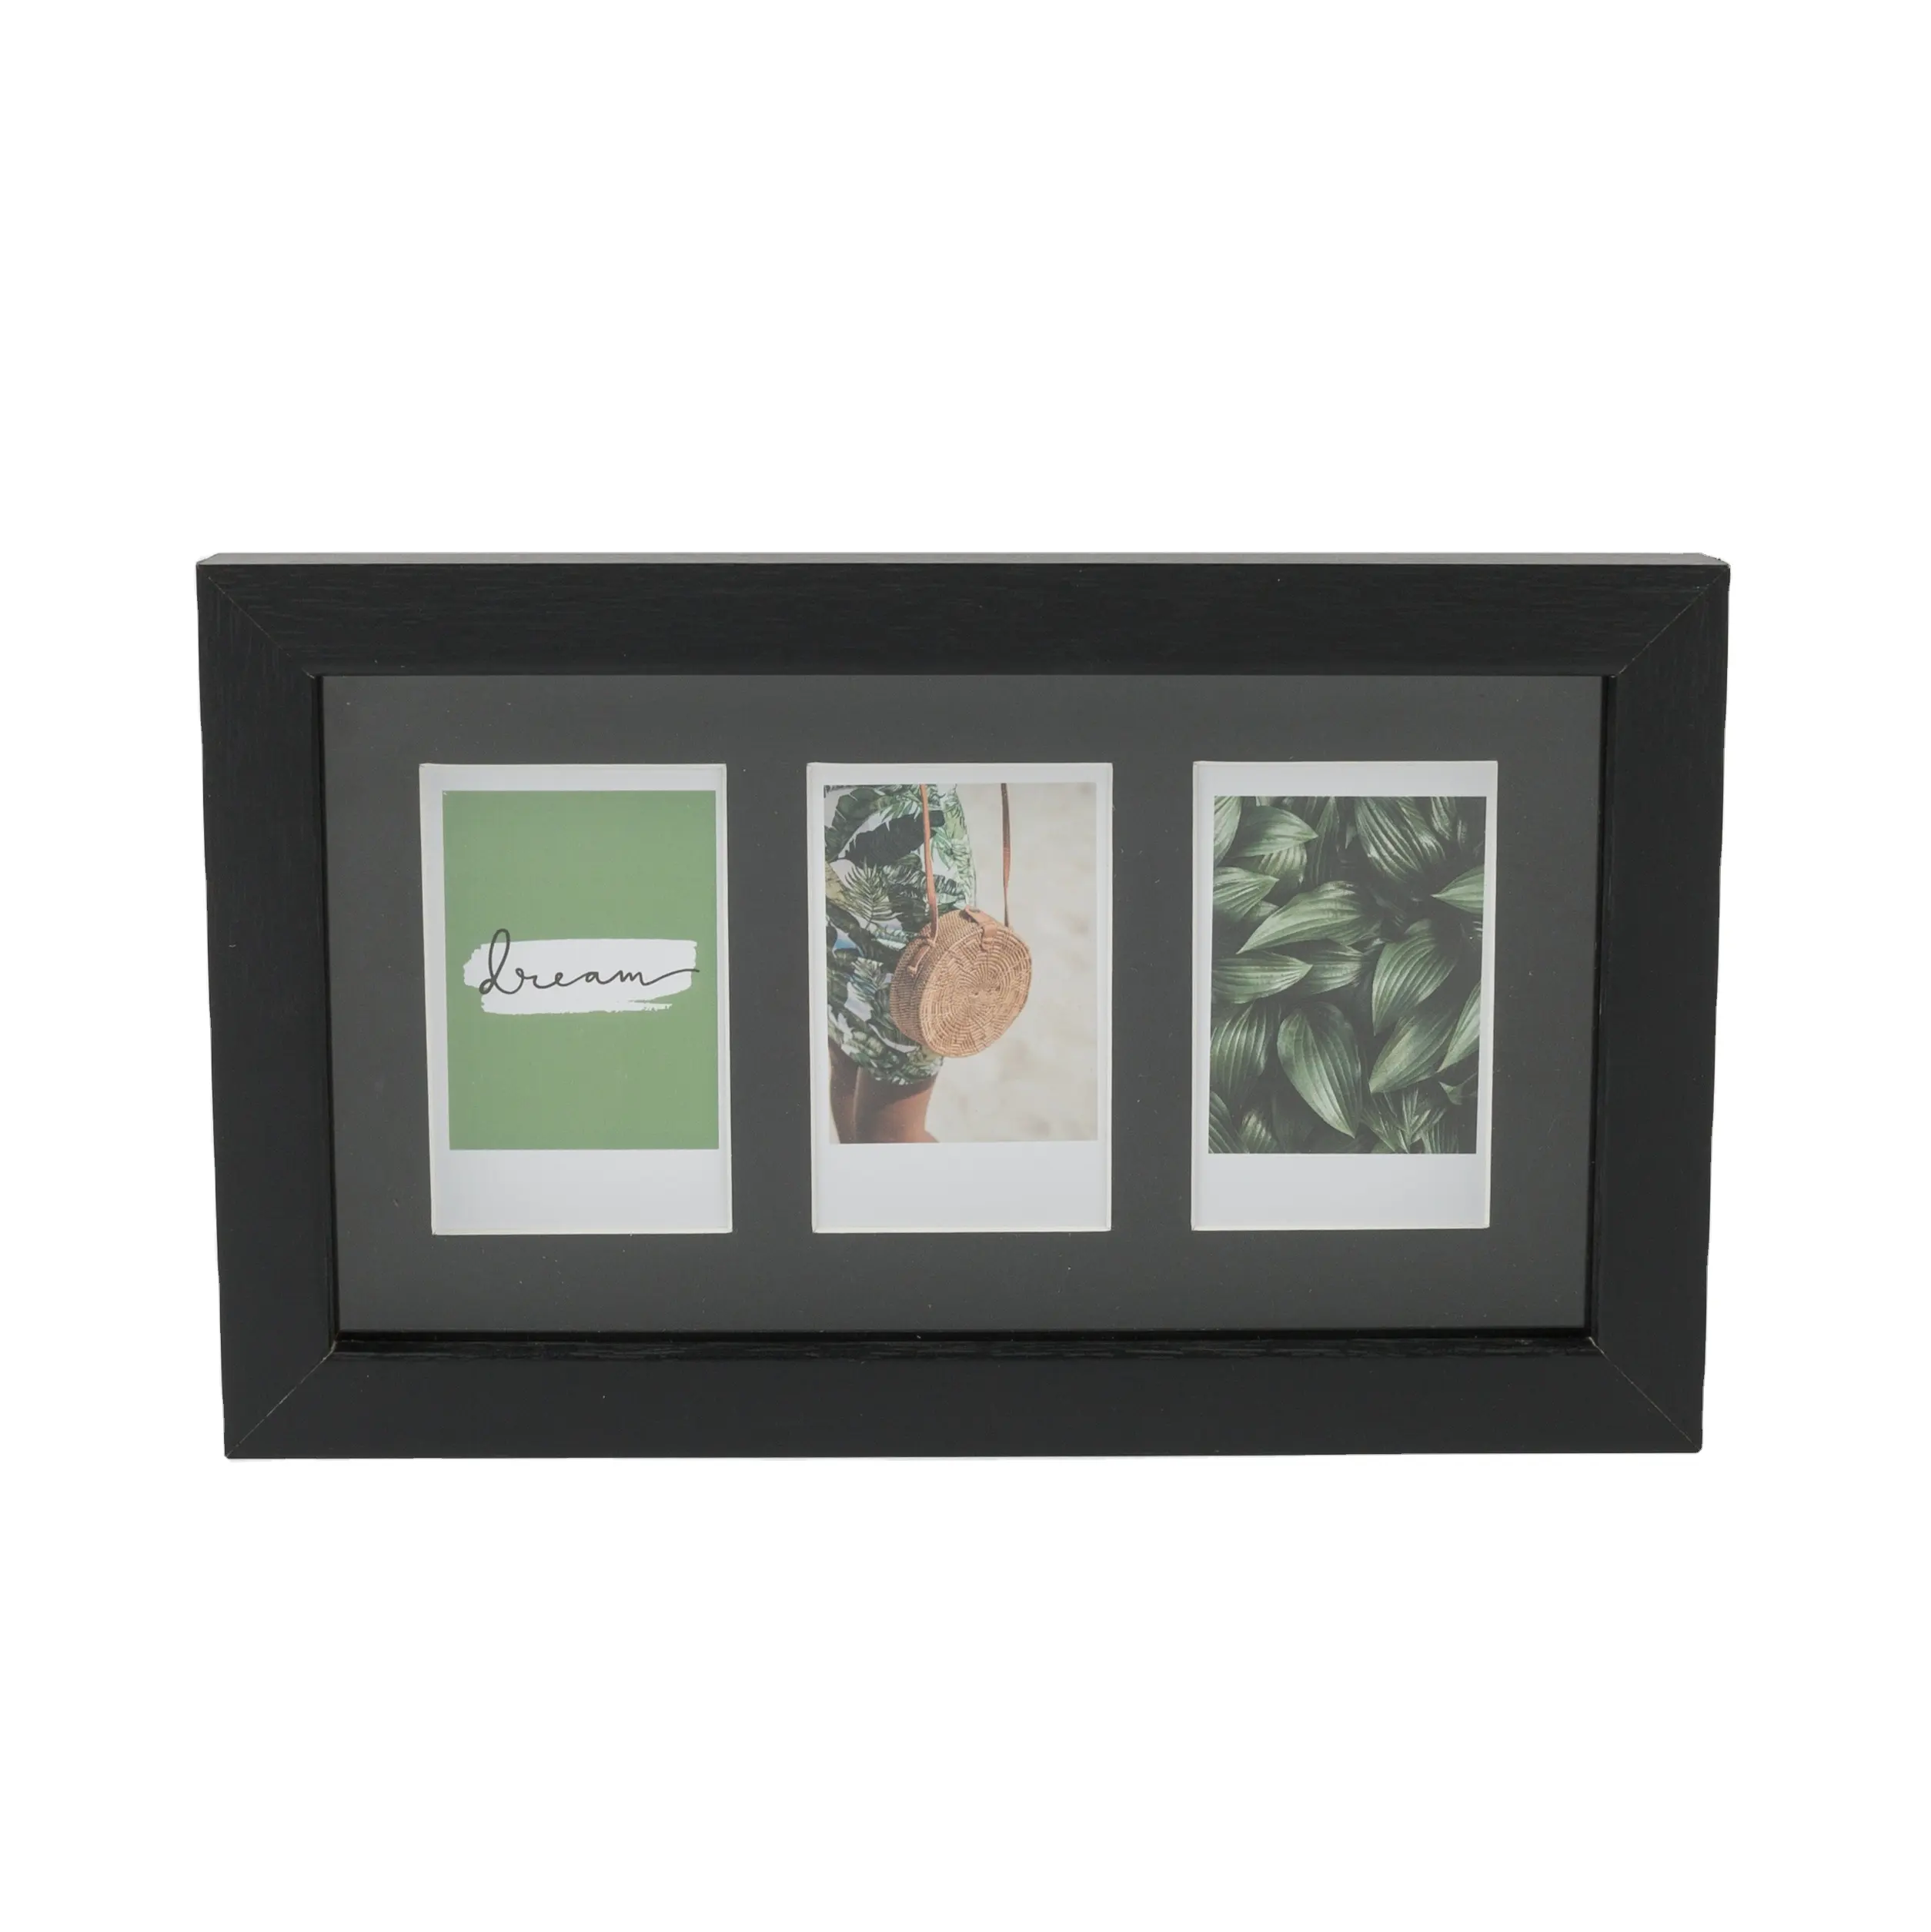 Good Quality Wholesale 3 Opening 4x6 inch fotos Polaroid Decorative Wooden Photo Picture Frame